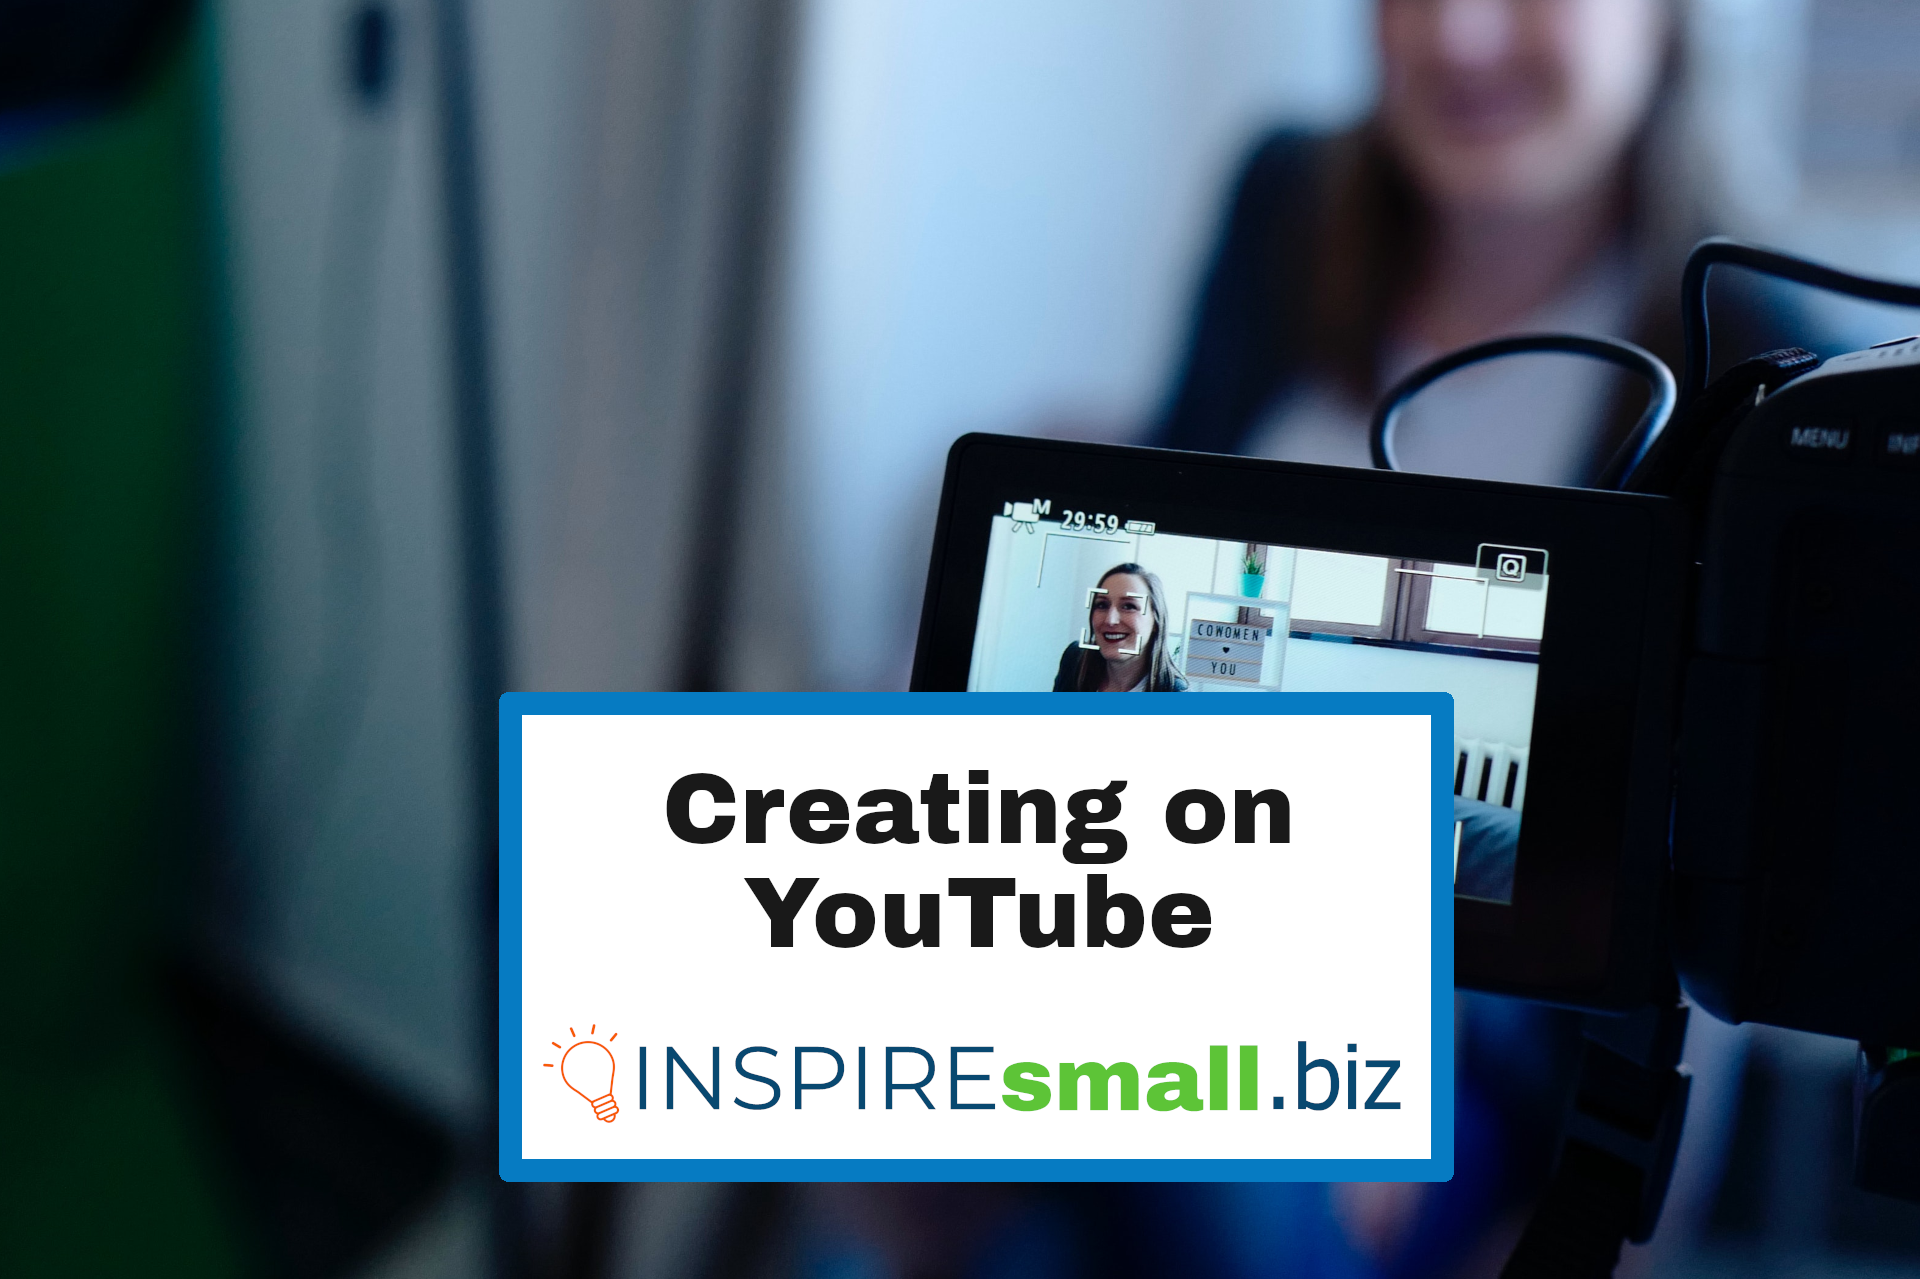 Creating on YouTube from INSPIREsmall.biz above an image of someone smiling on camera. The camera is in-focus and the rest of the shot is blurry.